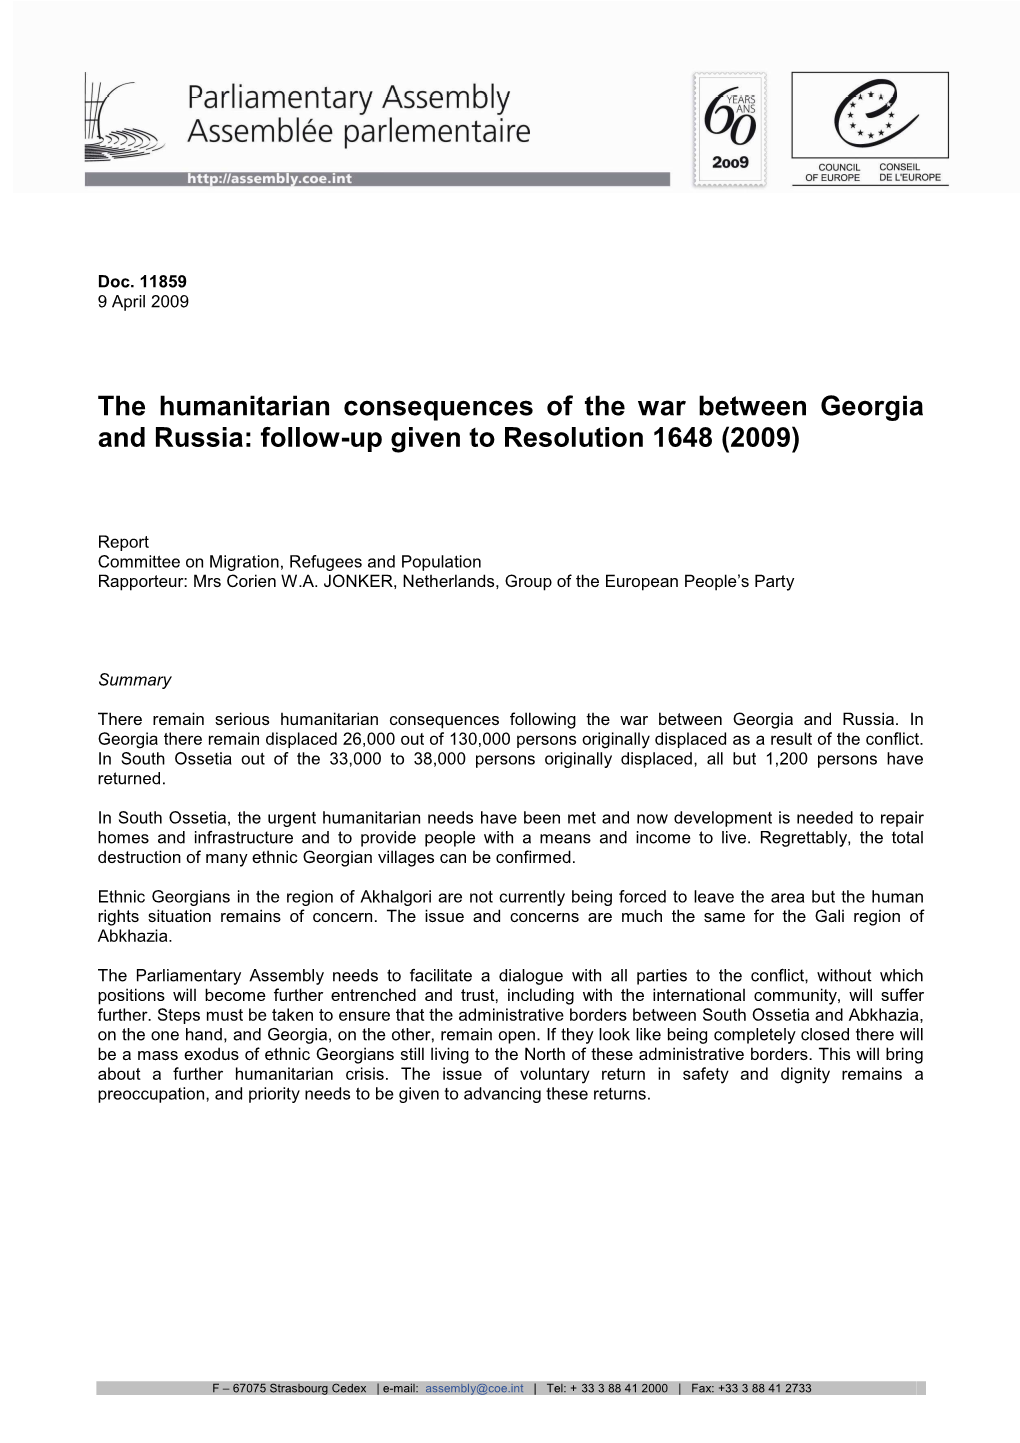 The Humanitarian Consequences of the War Between Georgia and Russia: Follow-Up Given to Resolution 1648 (2009)